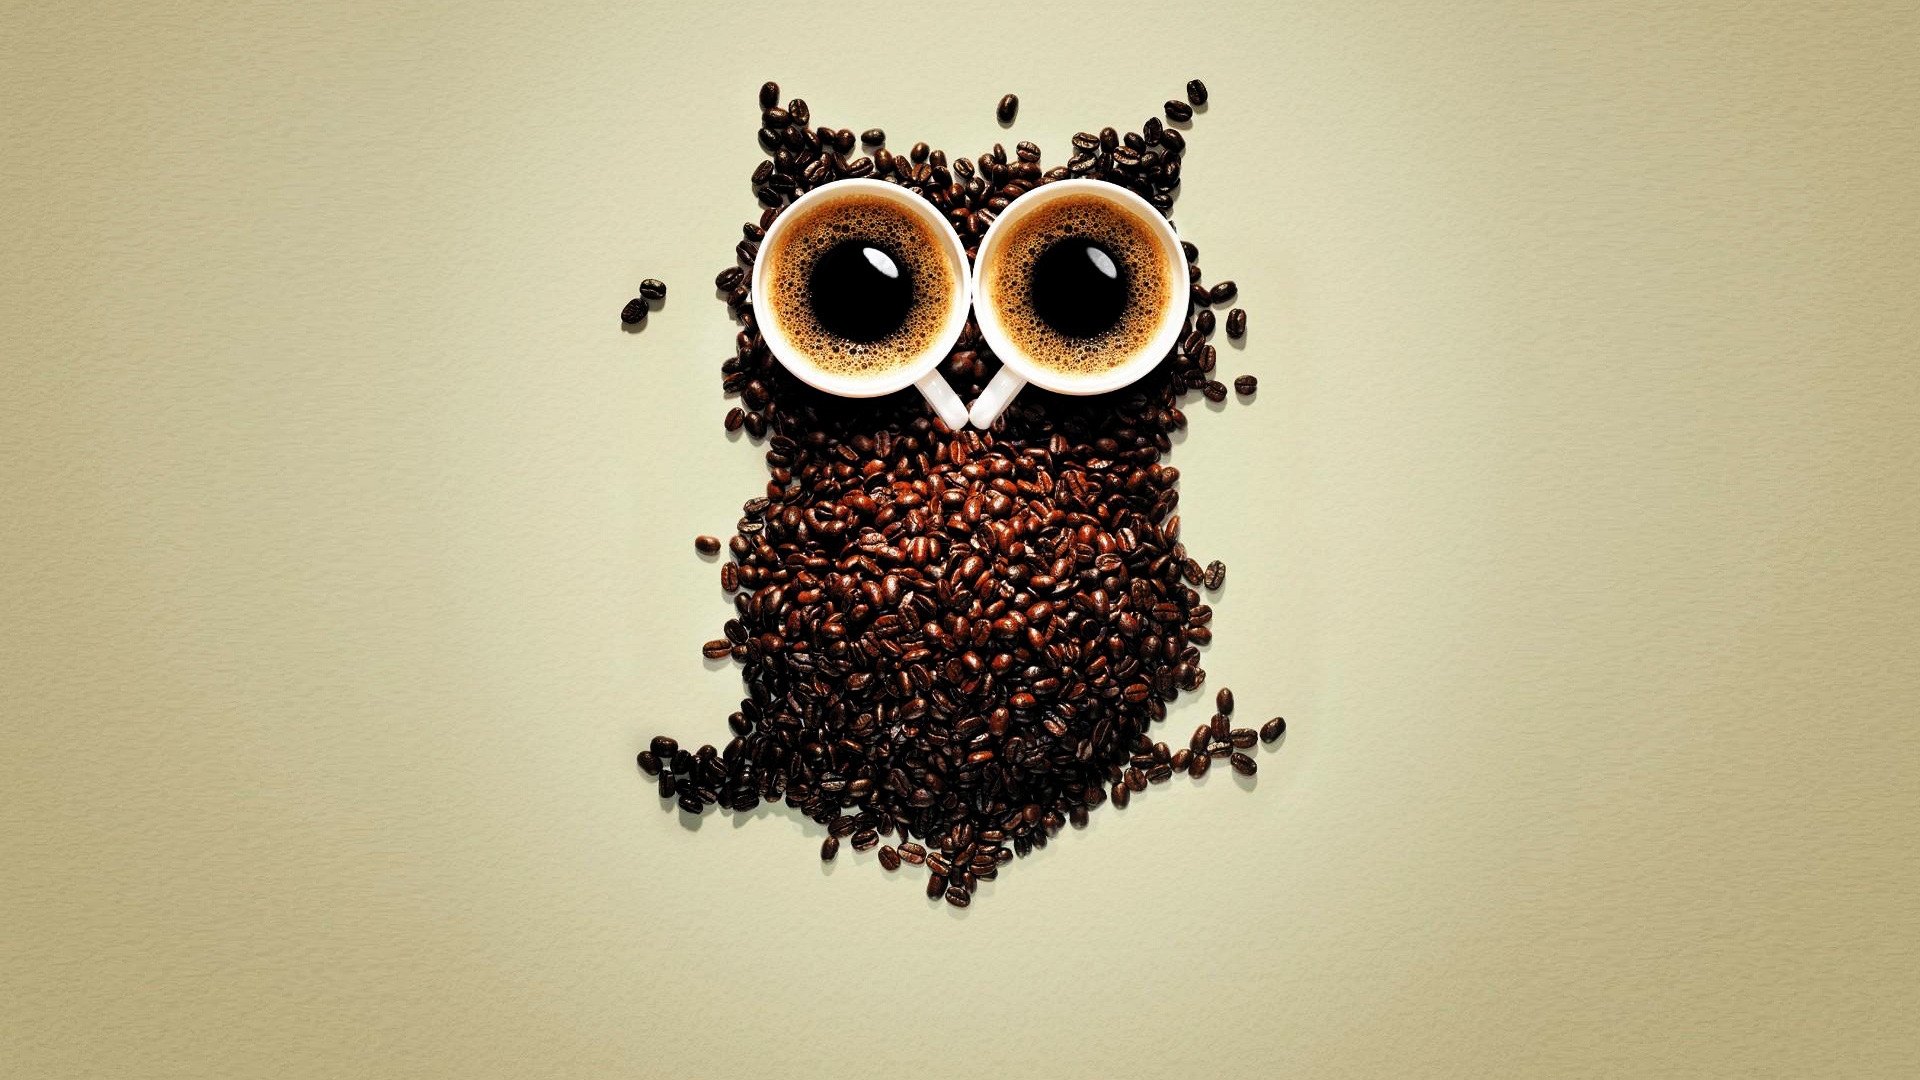 Funny Coffee Owl for 1920 x 1080 HDTV 1080p resolution